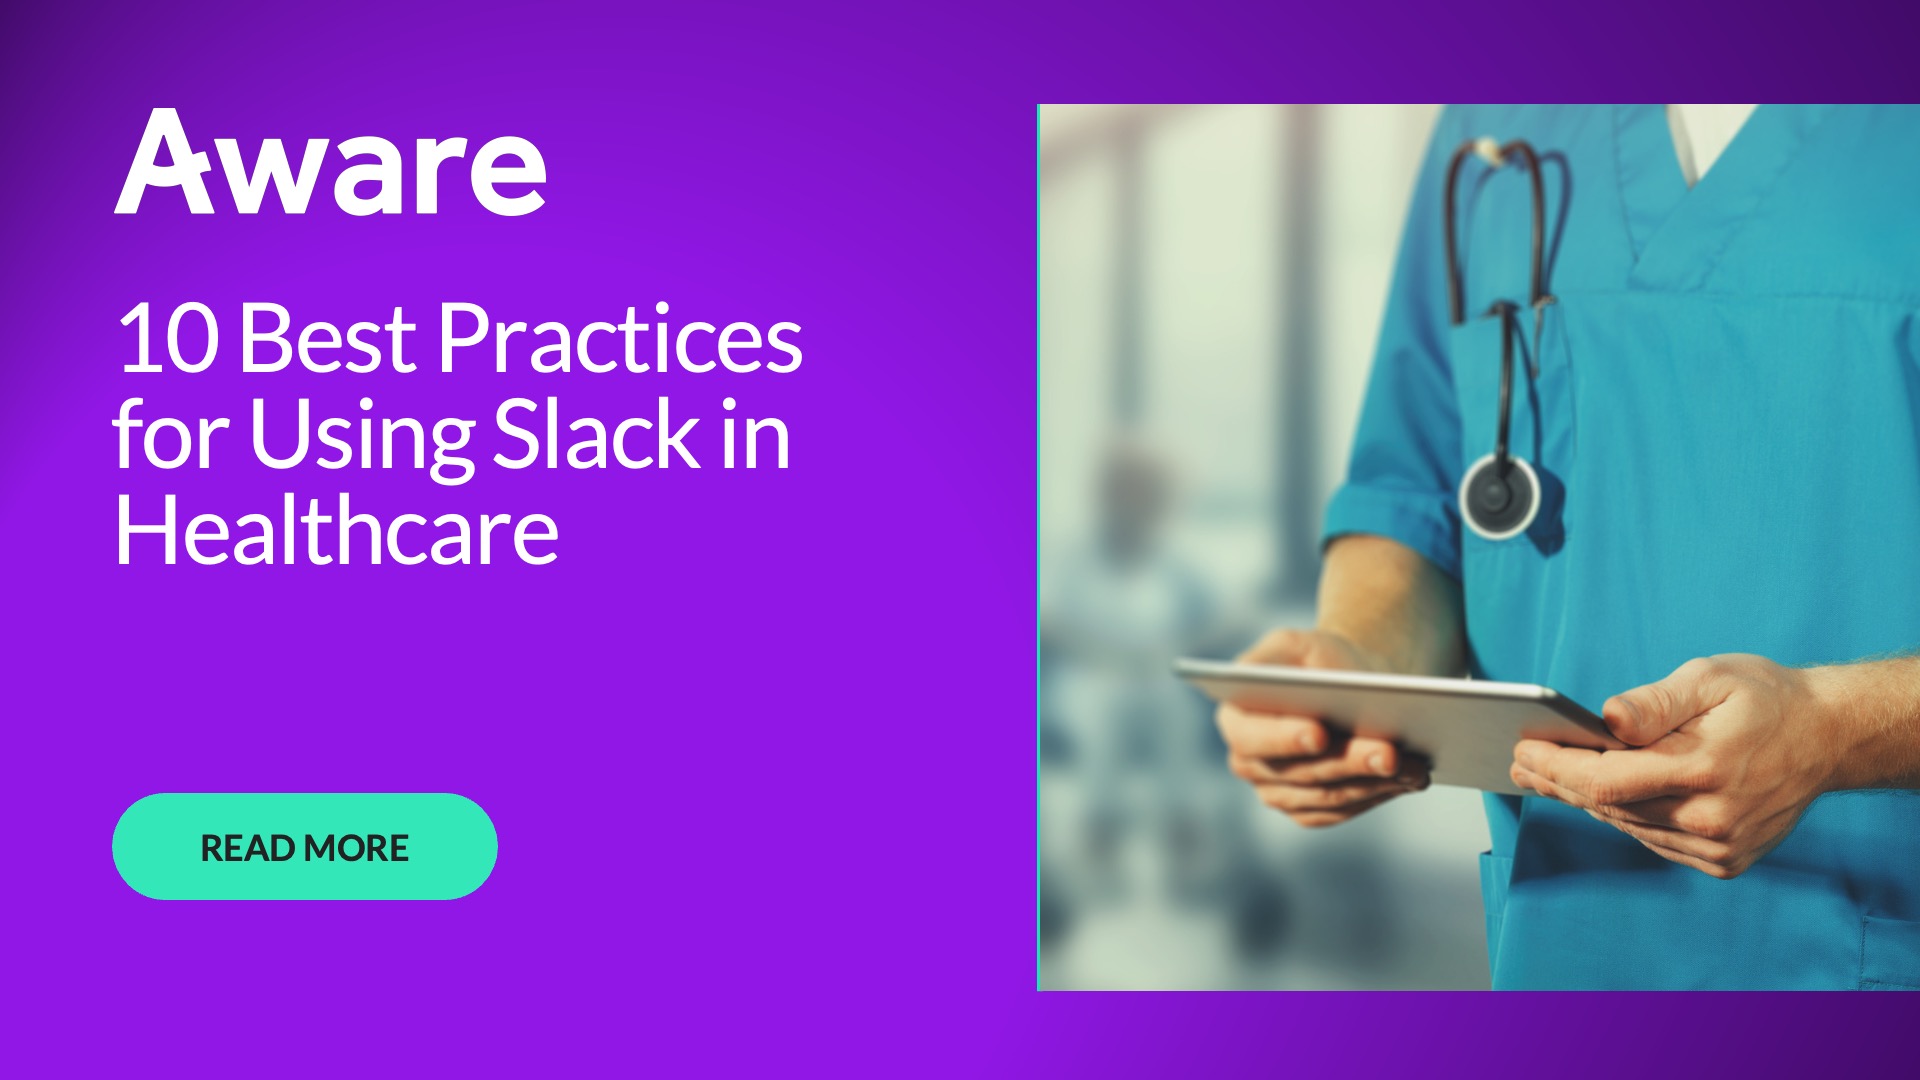 10 Best Practices for Using Slack in Healthcare